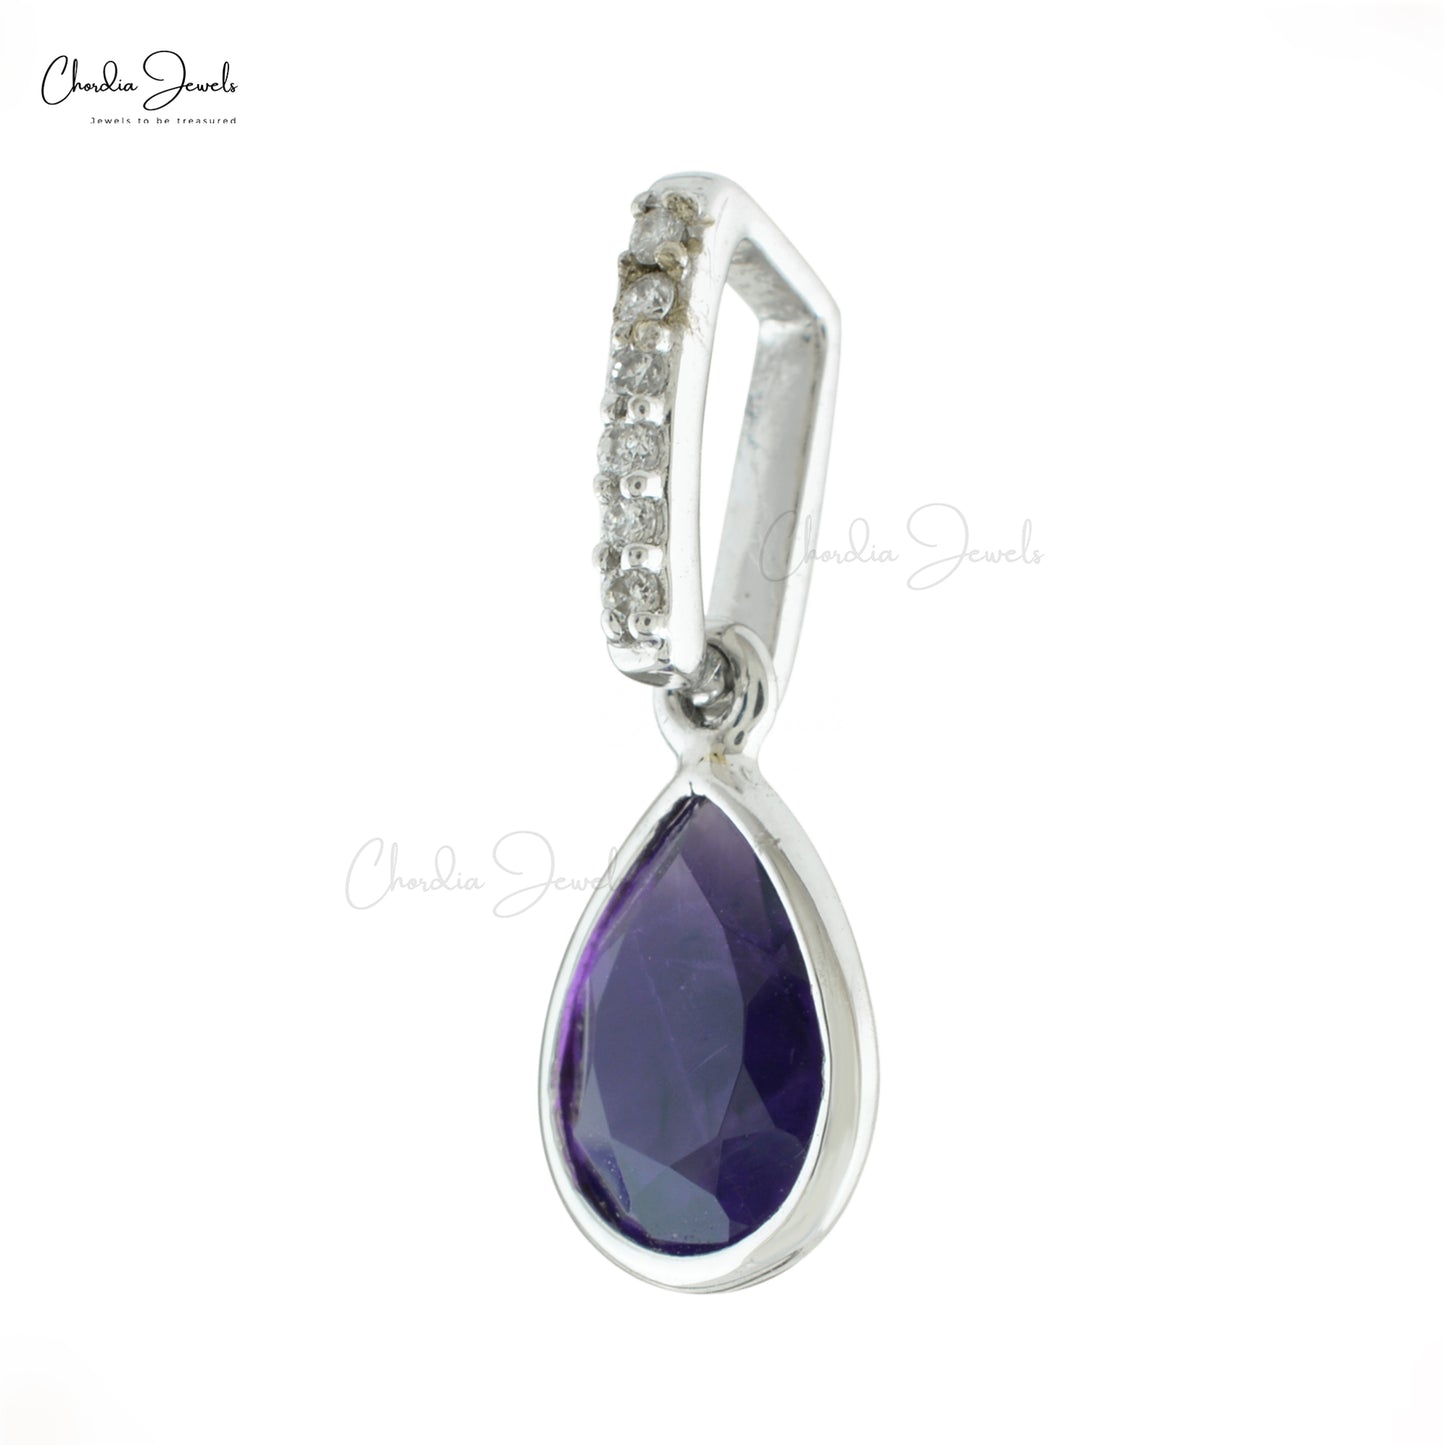 Natural White Diamond and Purple Amethyst Handmade Drop Pendant Necklace in Real 14k White Gold Valentine's Day Gift